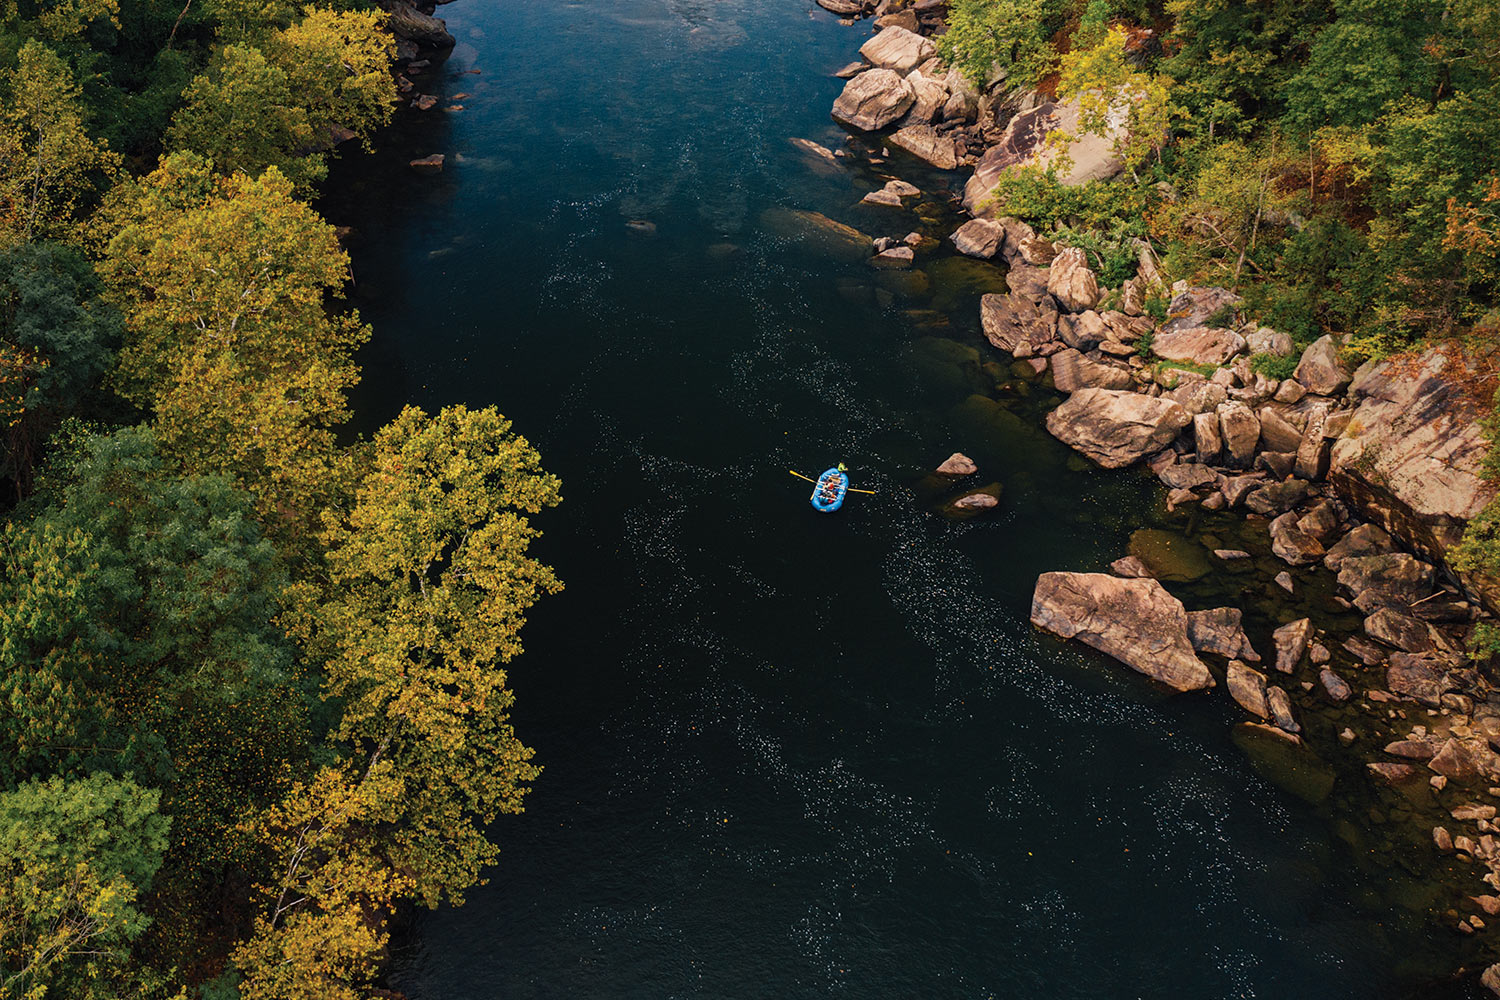 overhead view of raft moving downriver with rocks and trees on riverbank